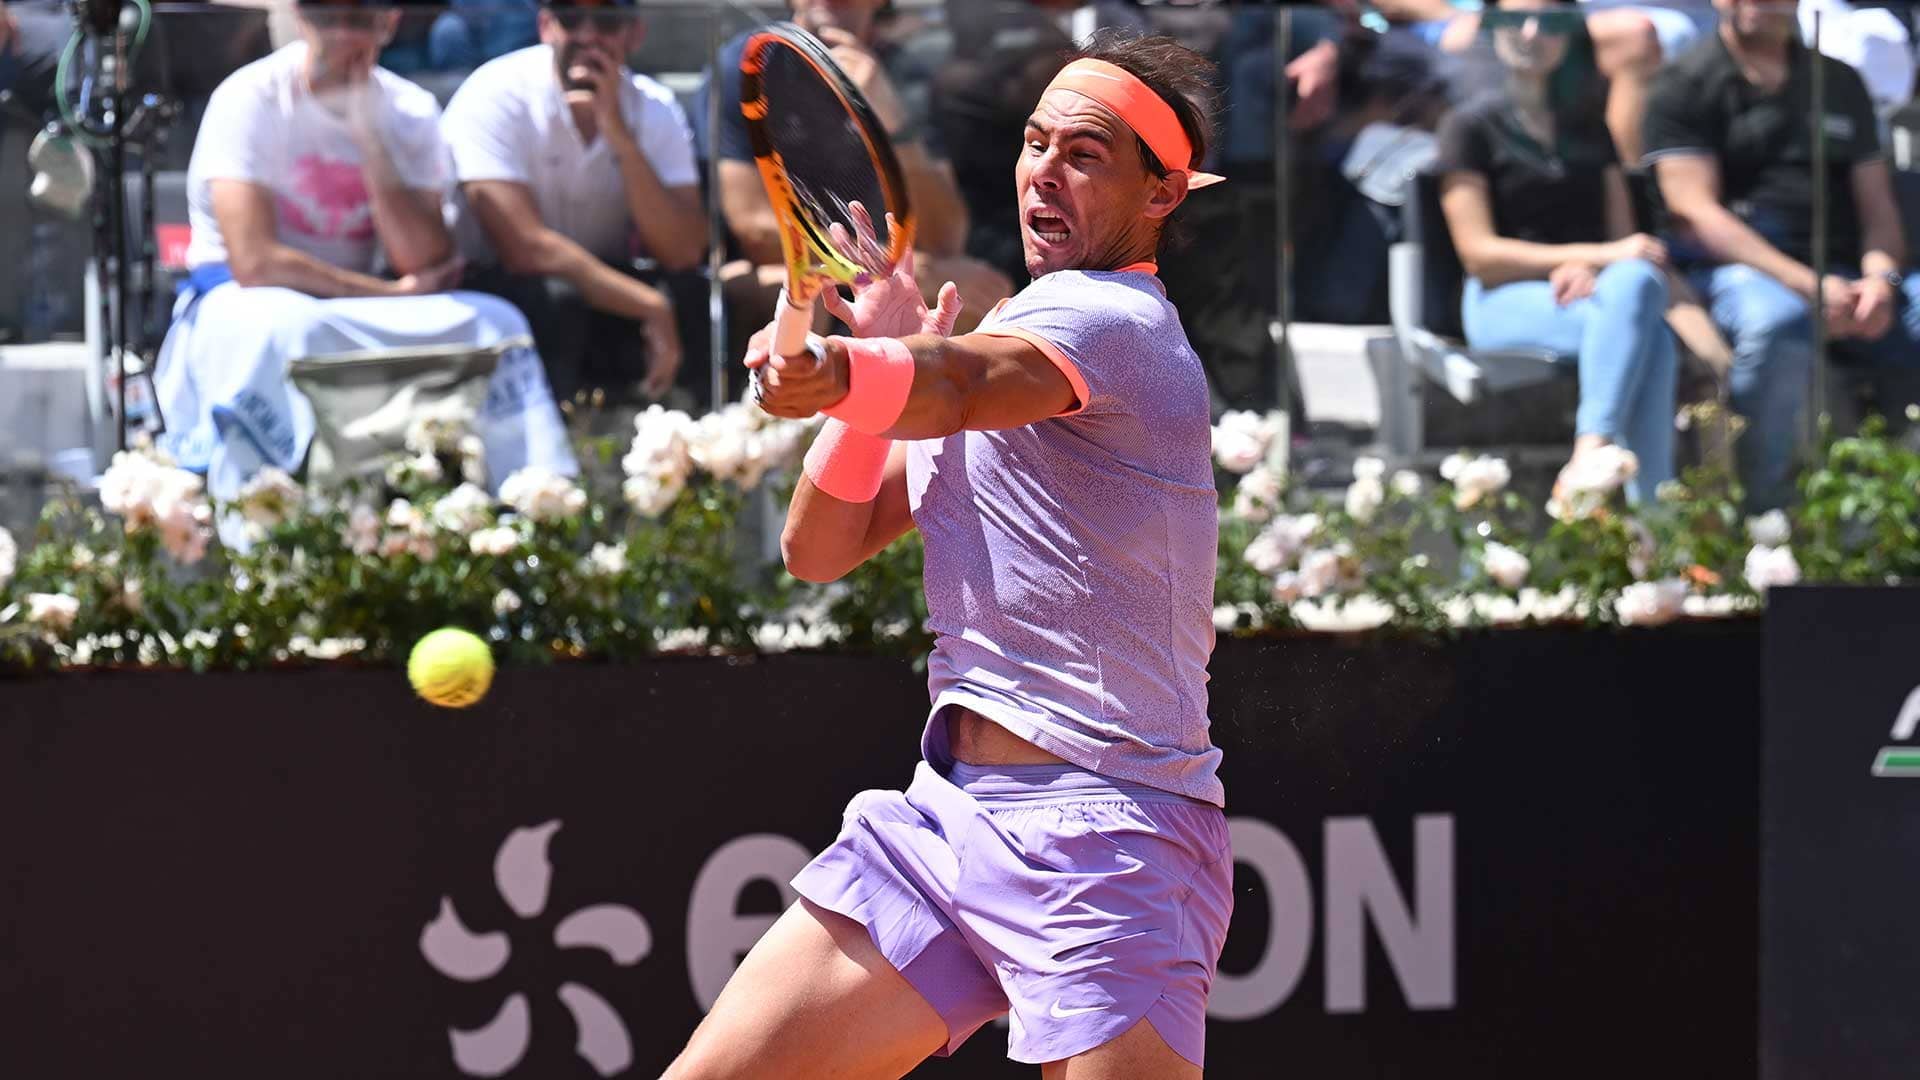 Nadal battles hard for opening win in Rome